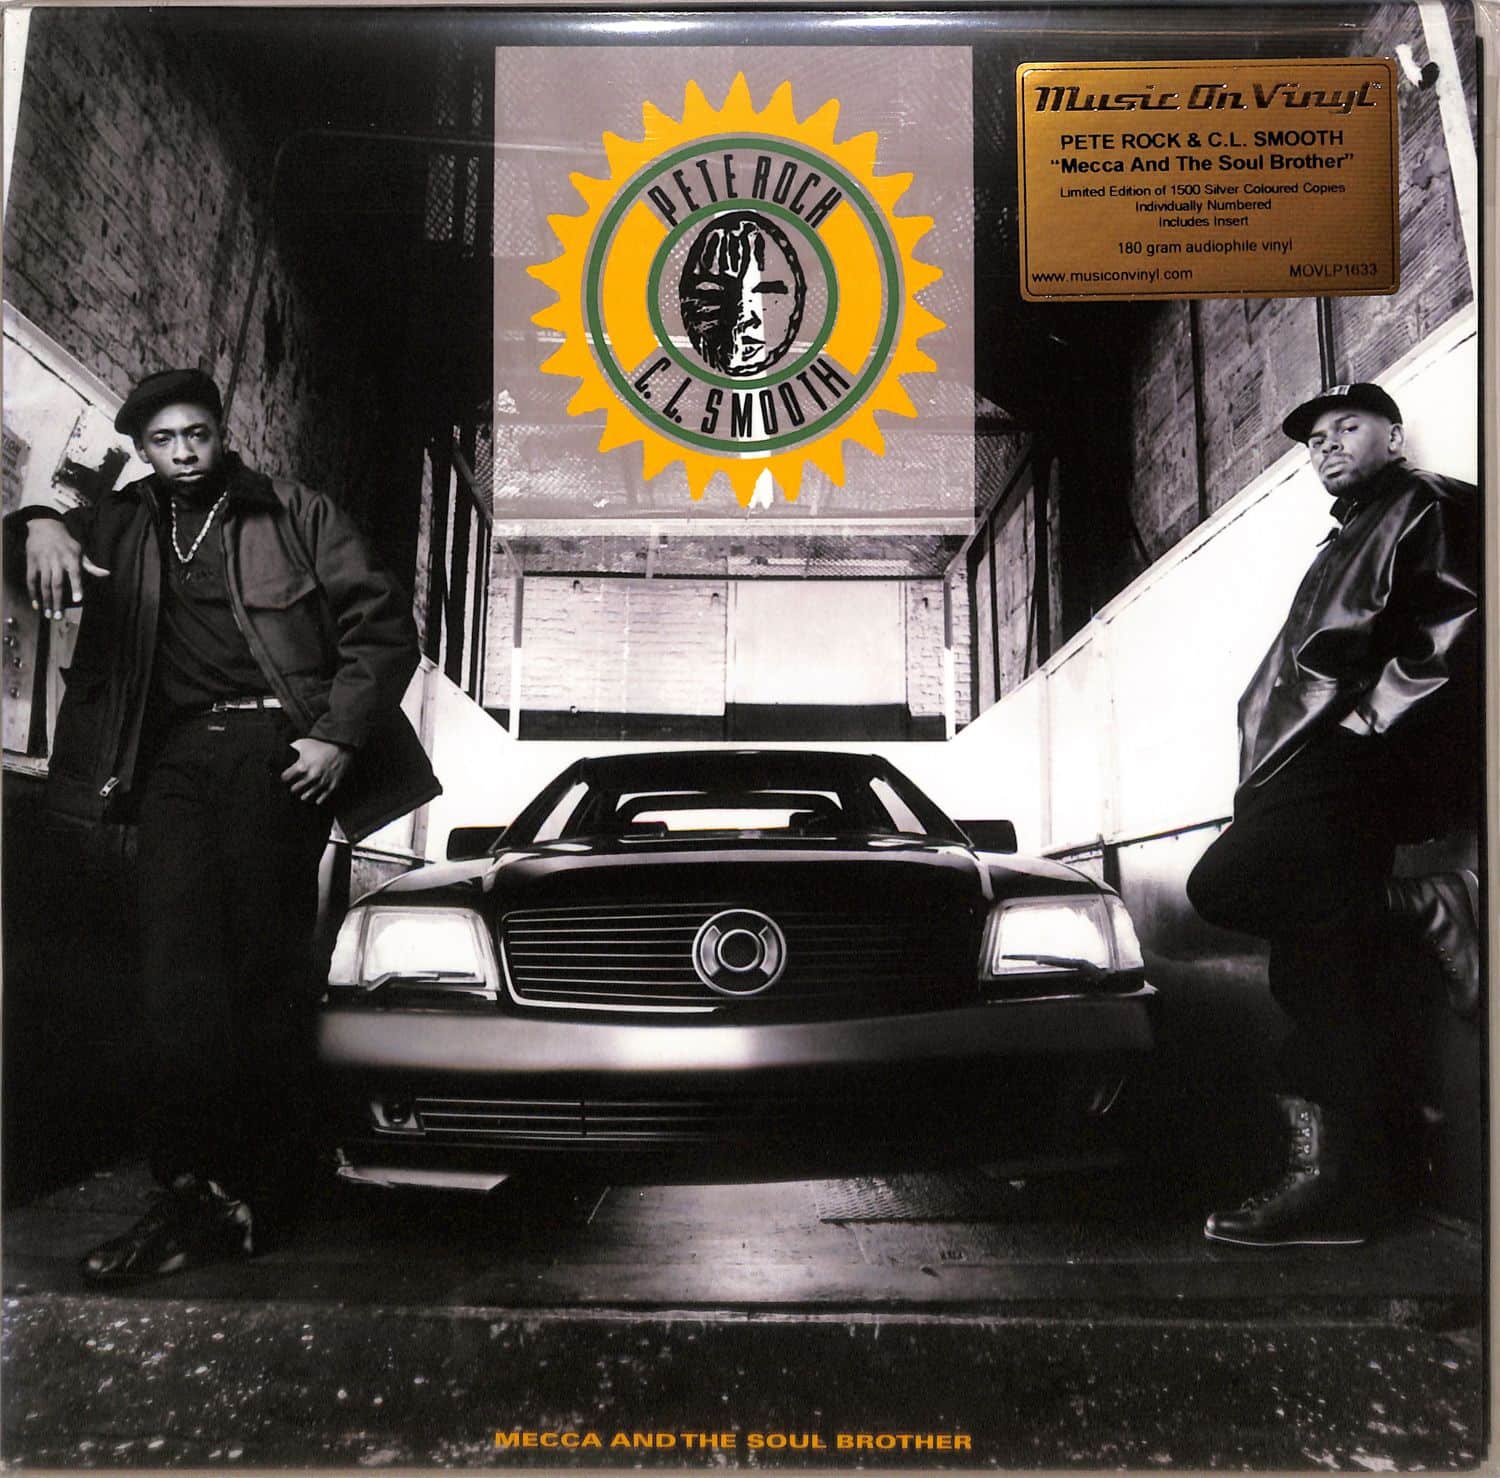 Pete Rock & C.L. Smooth - MECCA AND THE SOUL BROTHER 